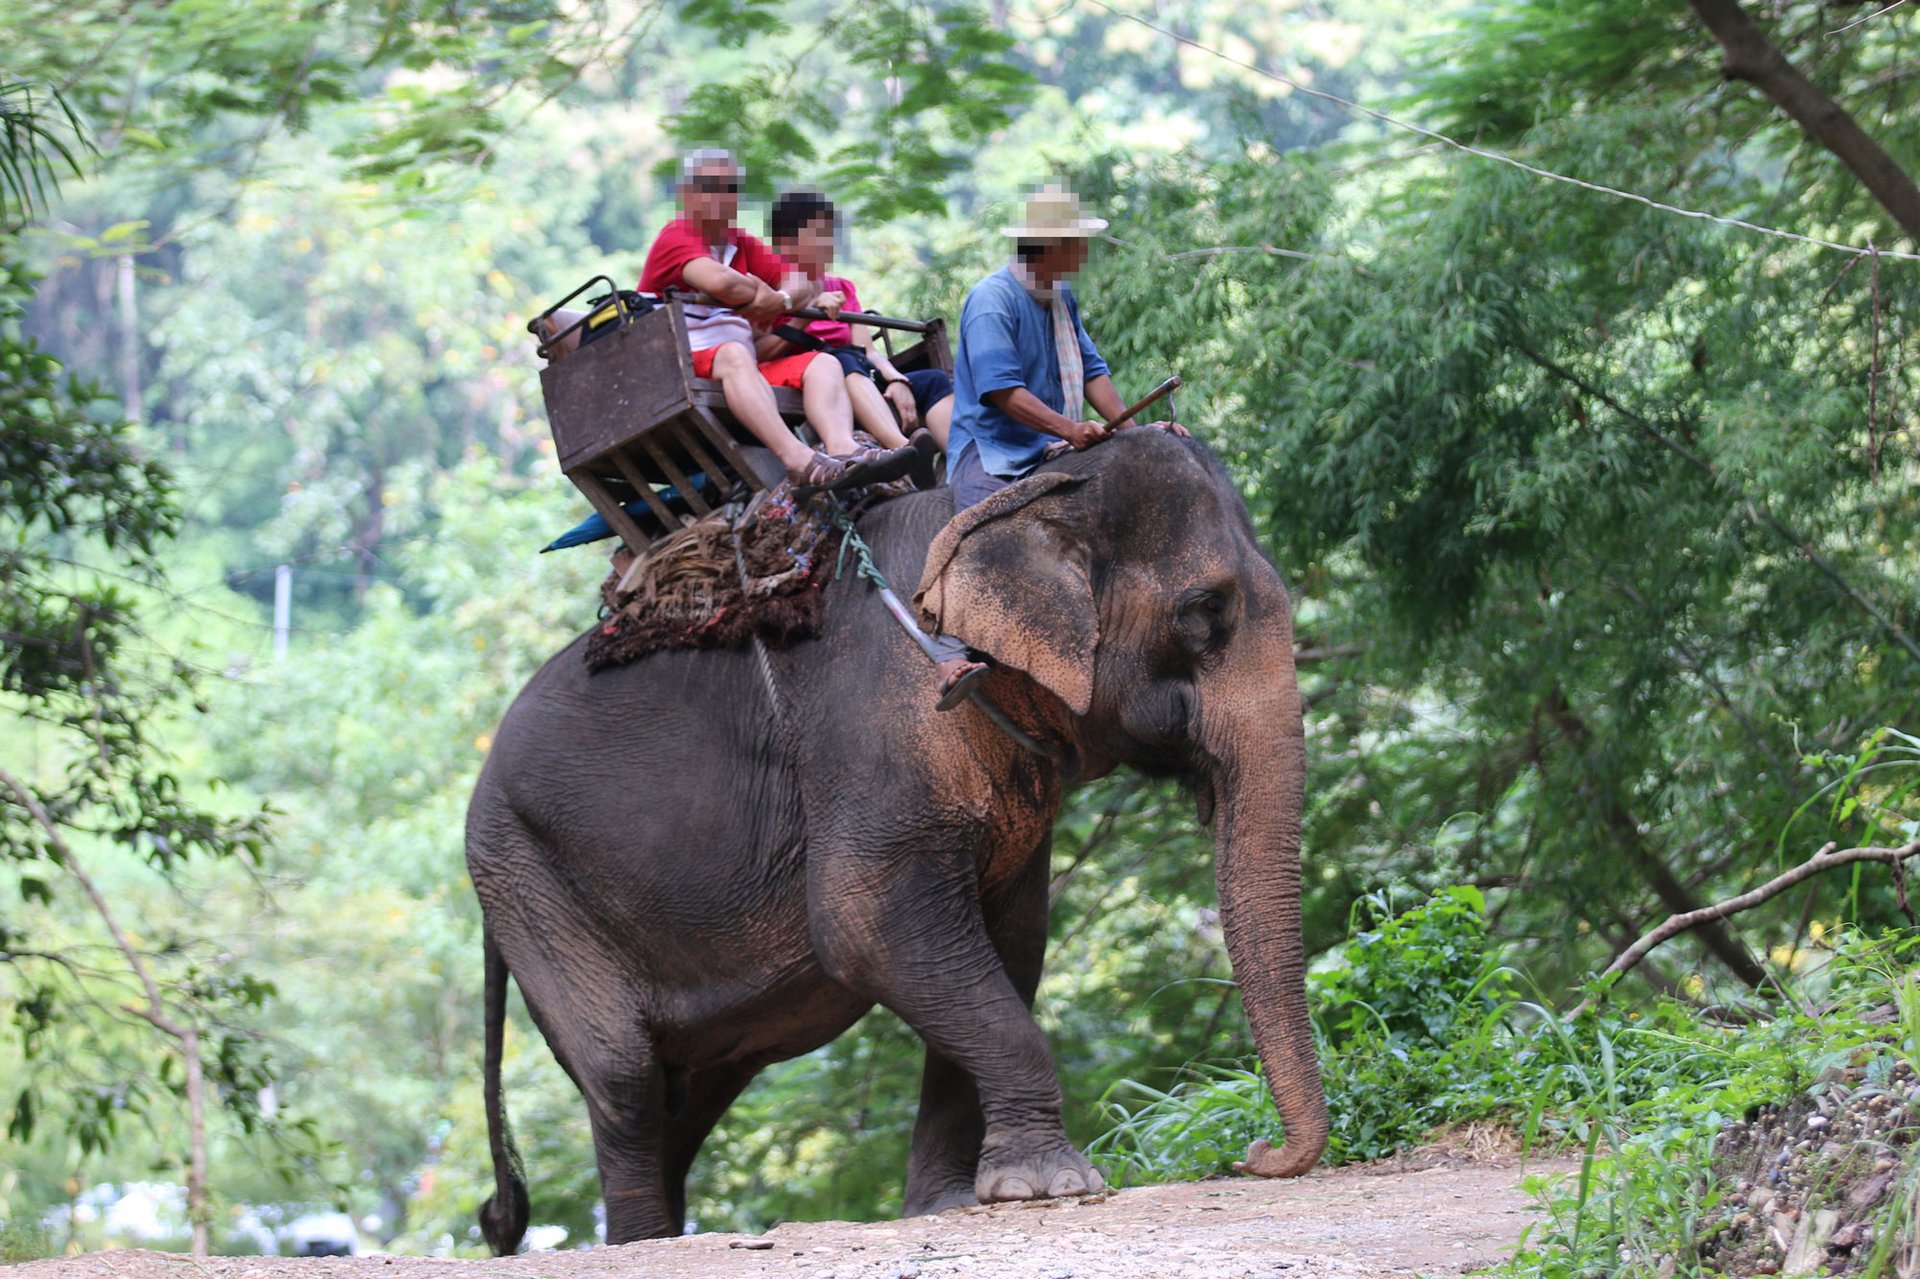 Tourists take a ride on an elephant in Thailand